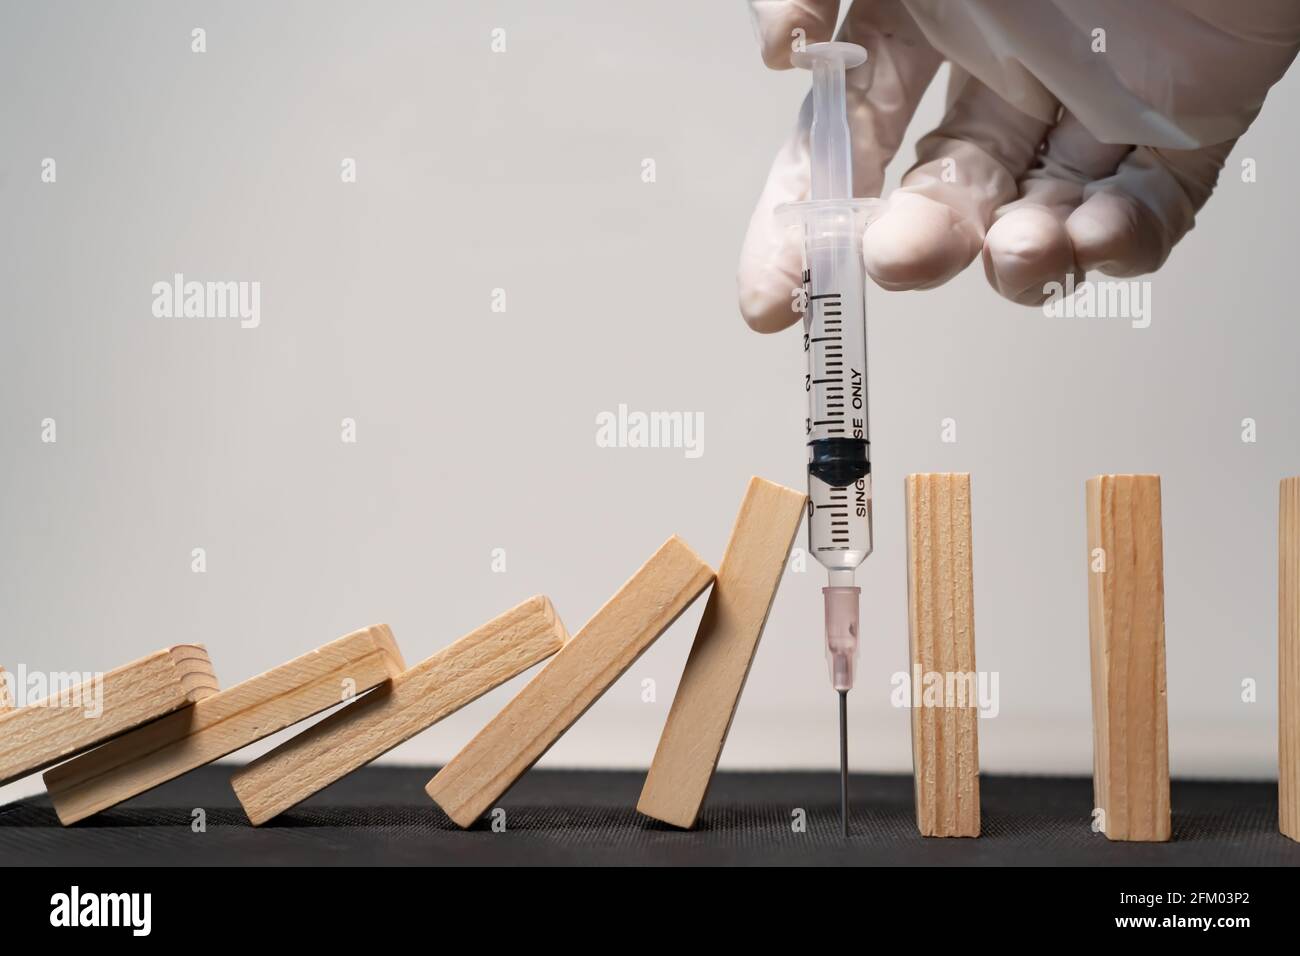 Vaccine can stop the pandemic concept Stock Photo